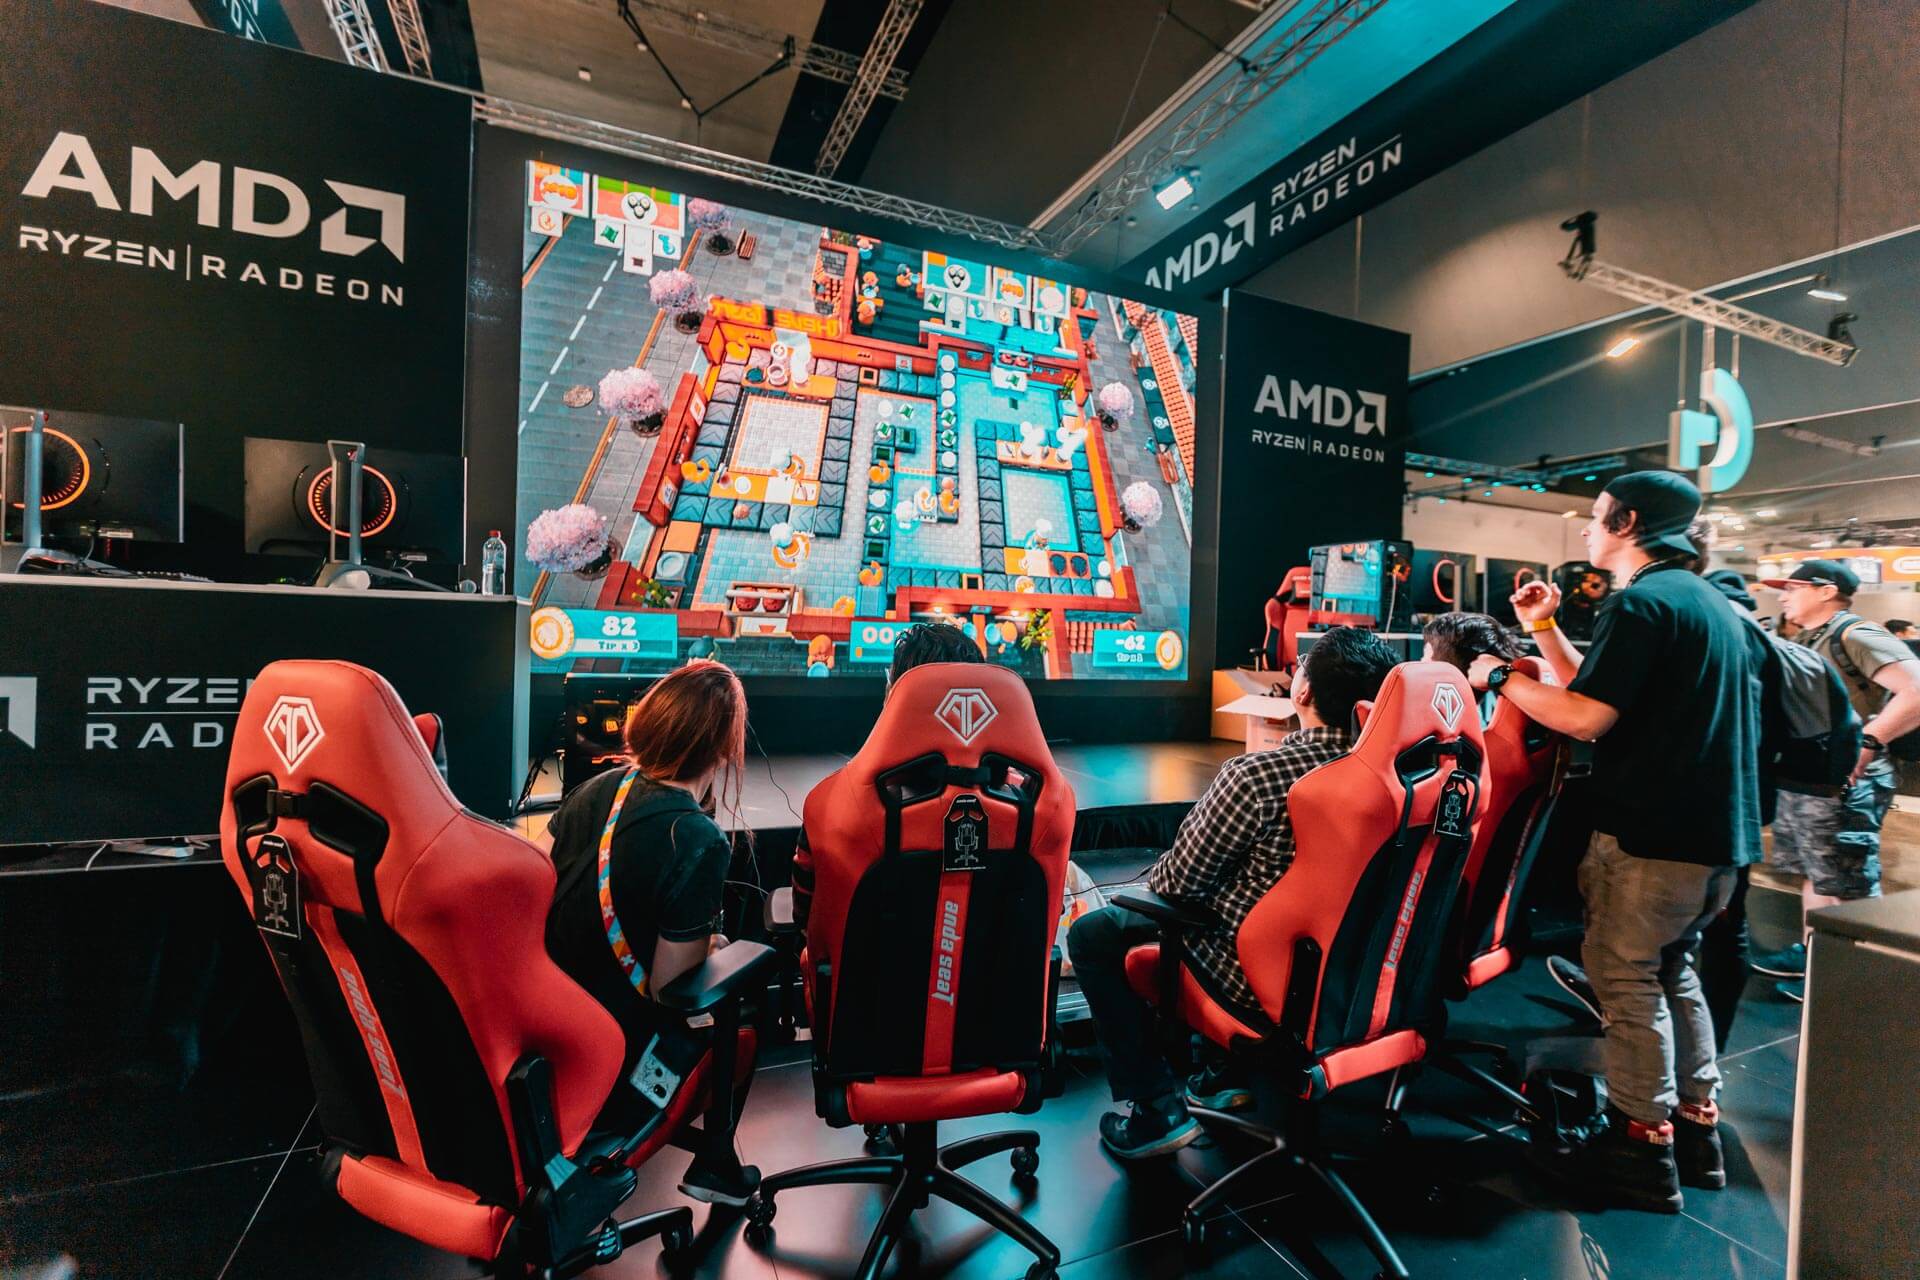 AMD – PAX Booth Photography